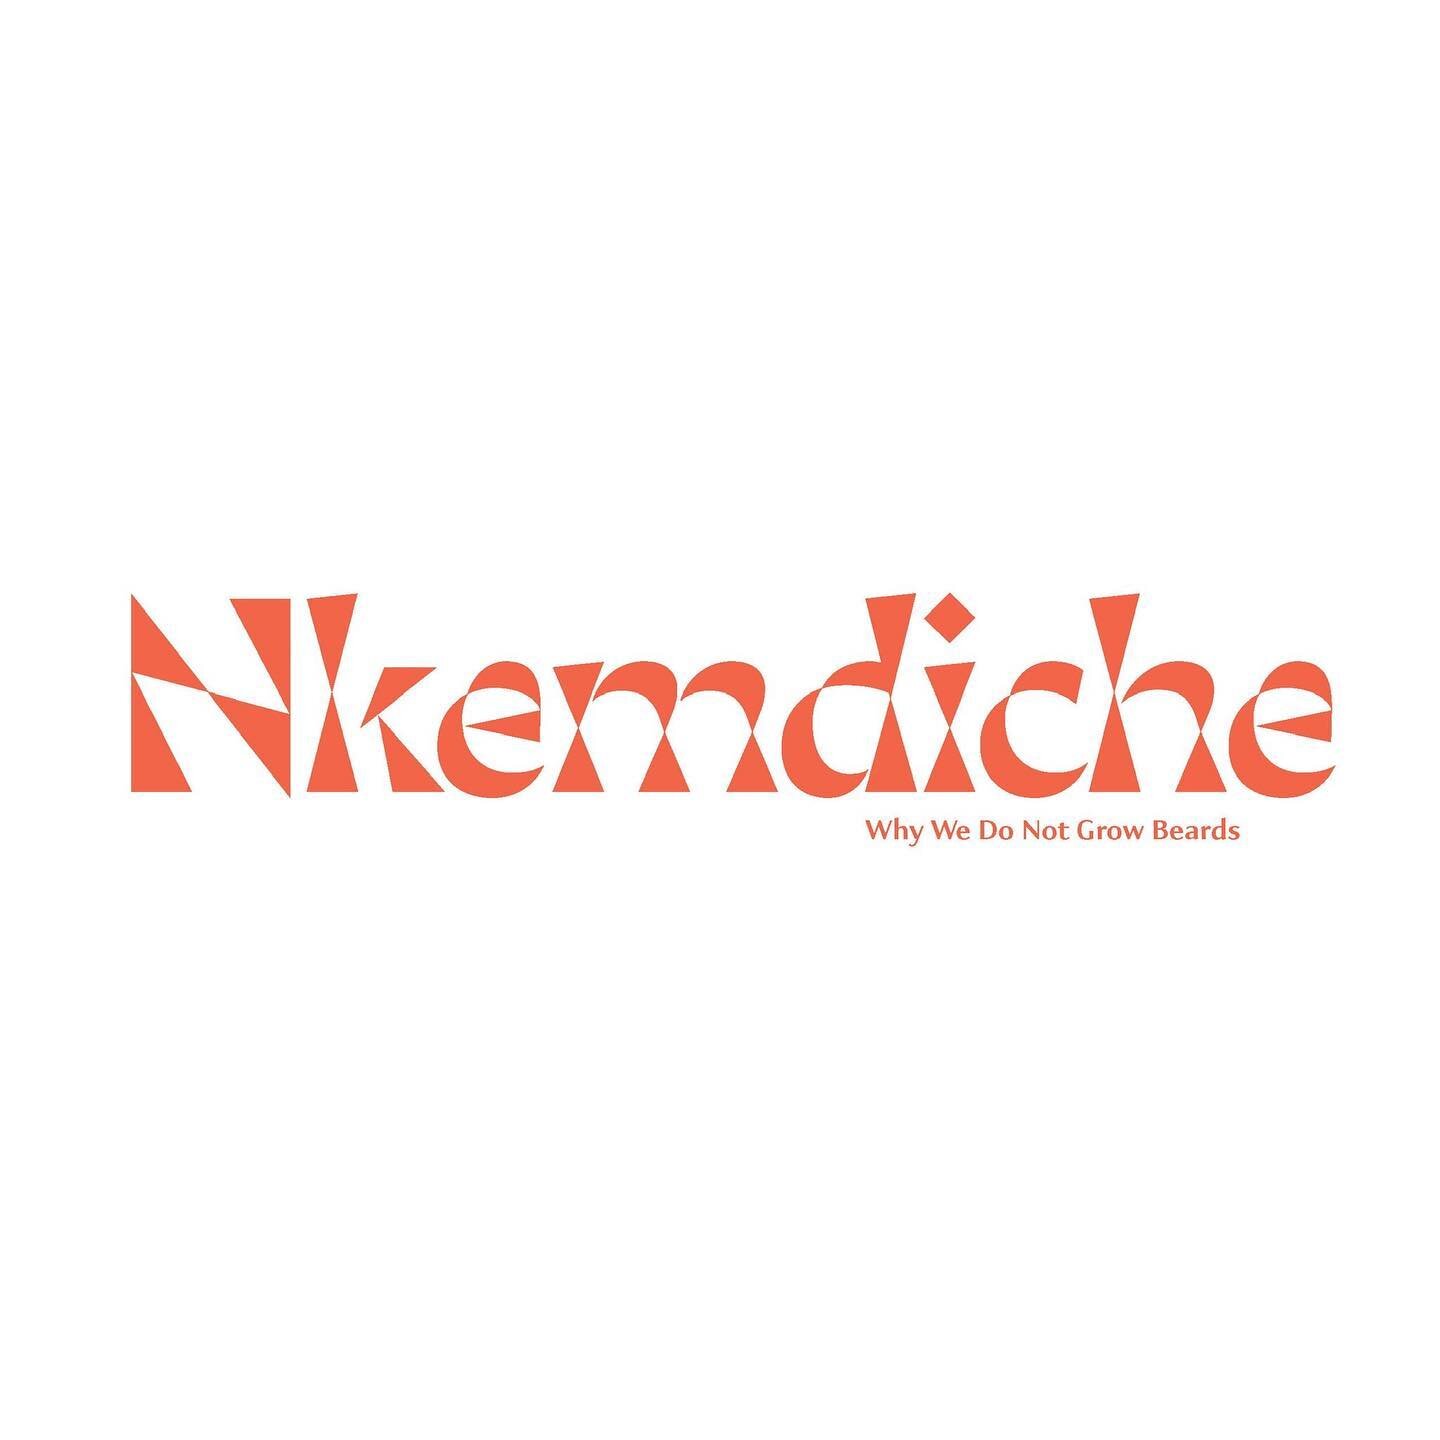 This week we are introducing a preview of our first project, &quot;Nkemdiche Why We Do Not Grow Beards&quot;, a classic Igbo folklore that takes place in an otherworldly time when women grew beards.

Text Reads: It is a genesis story of African women